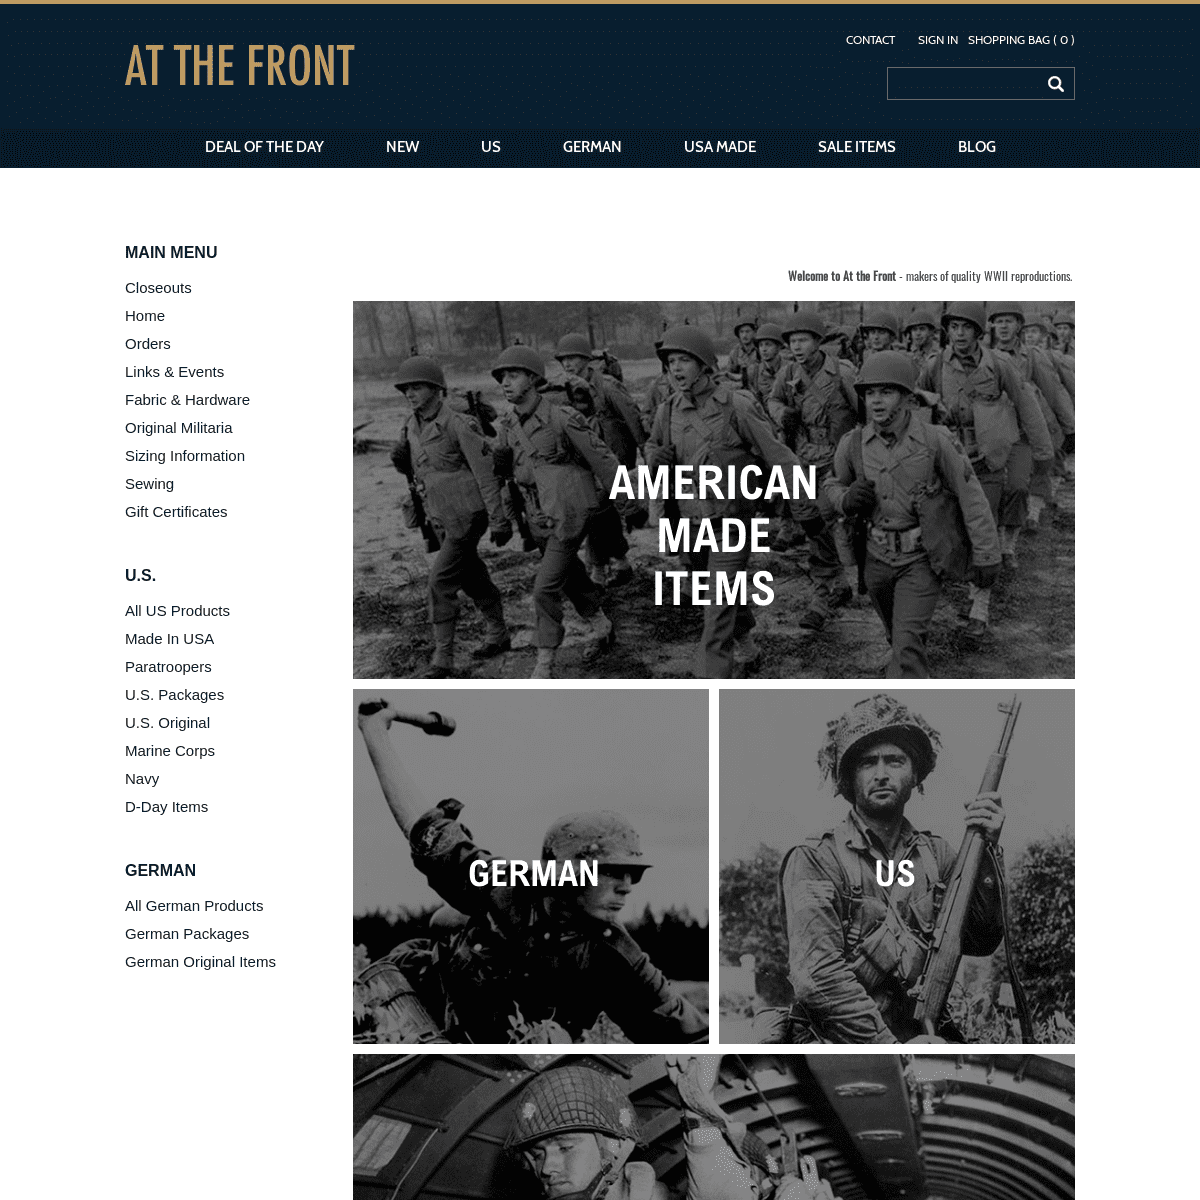 A complete backup of atthefront.com